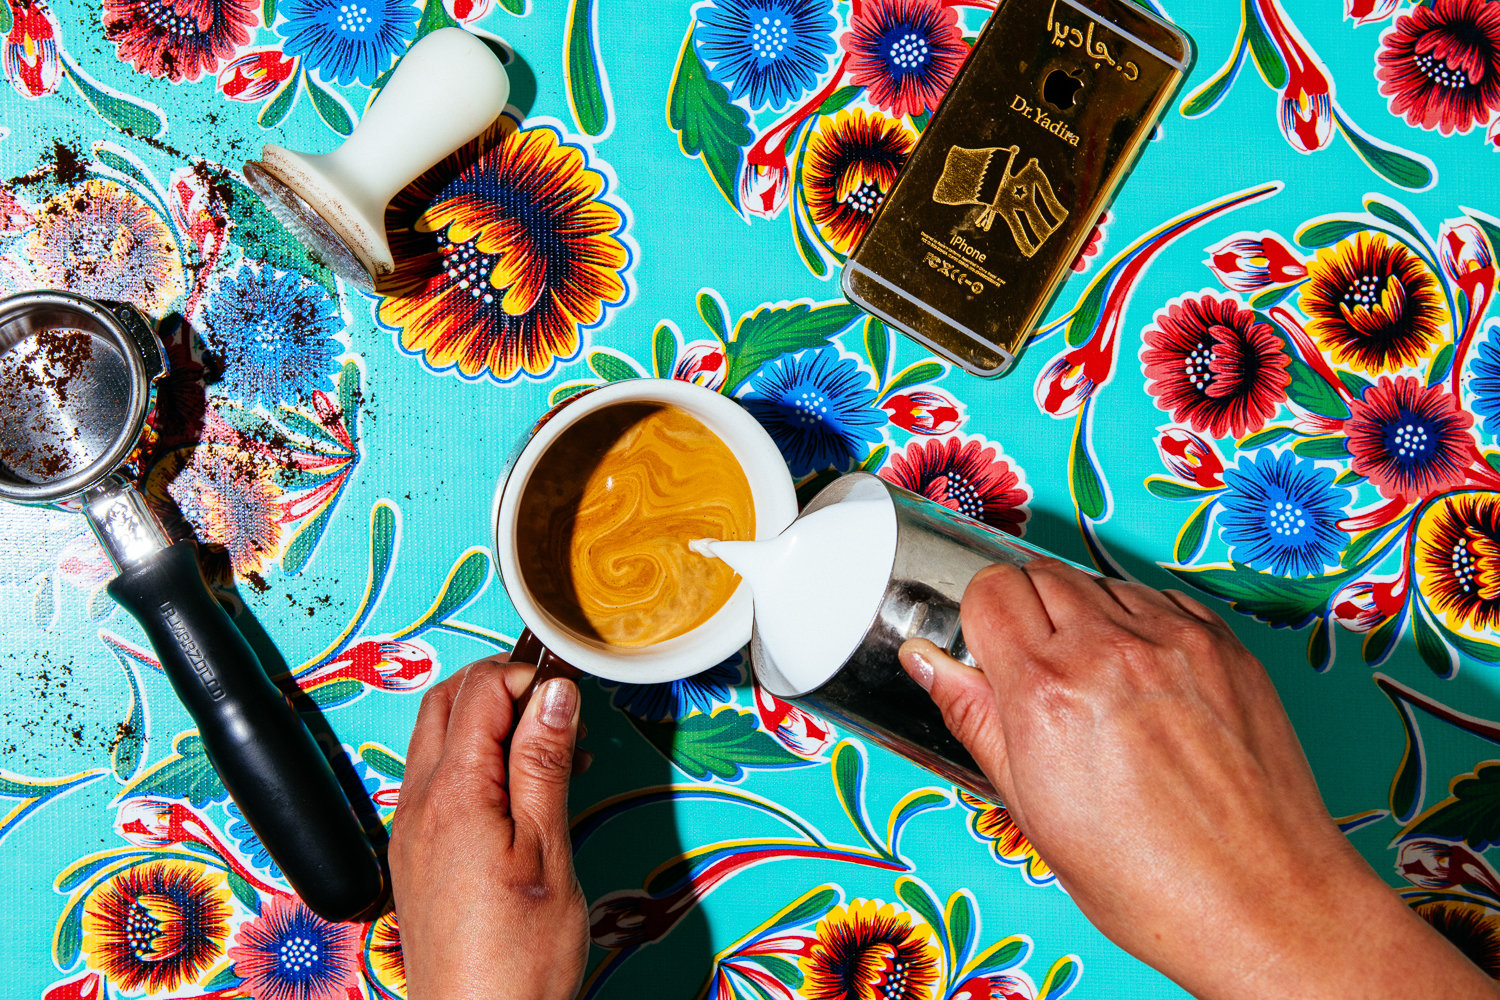 Lauren V. Allen's perfectly timed photo of Yadira's latte creation against a bright, flowery table